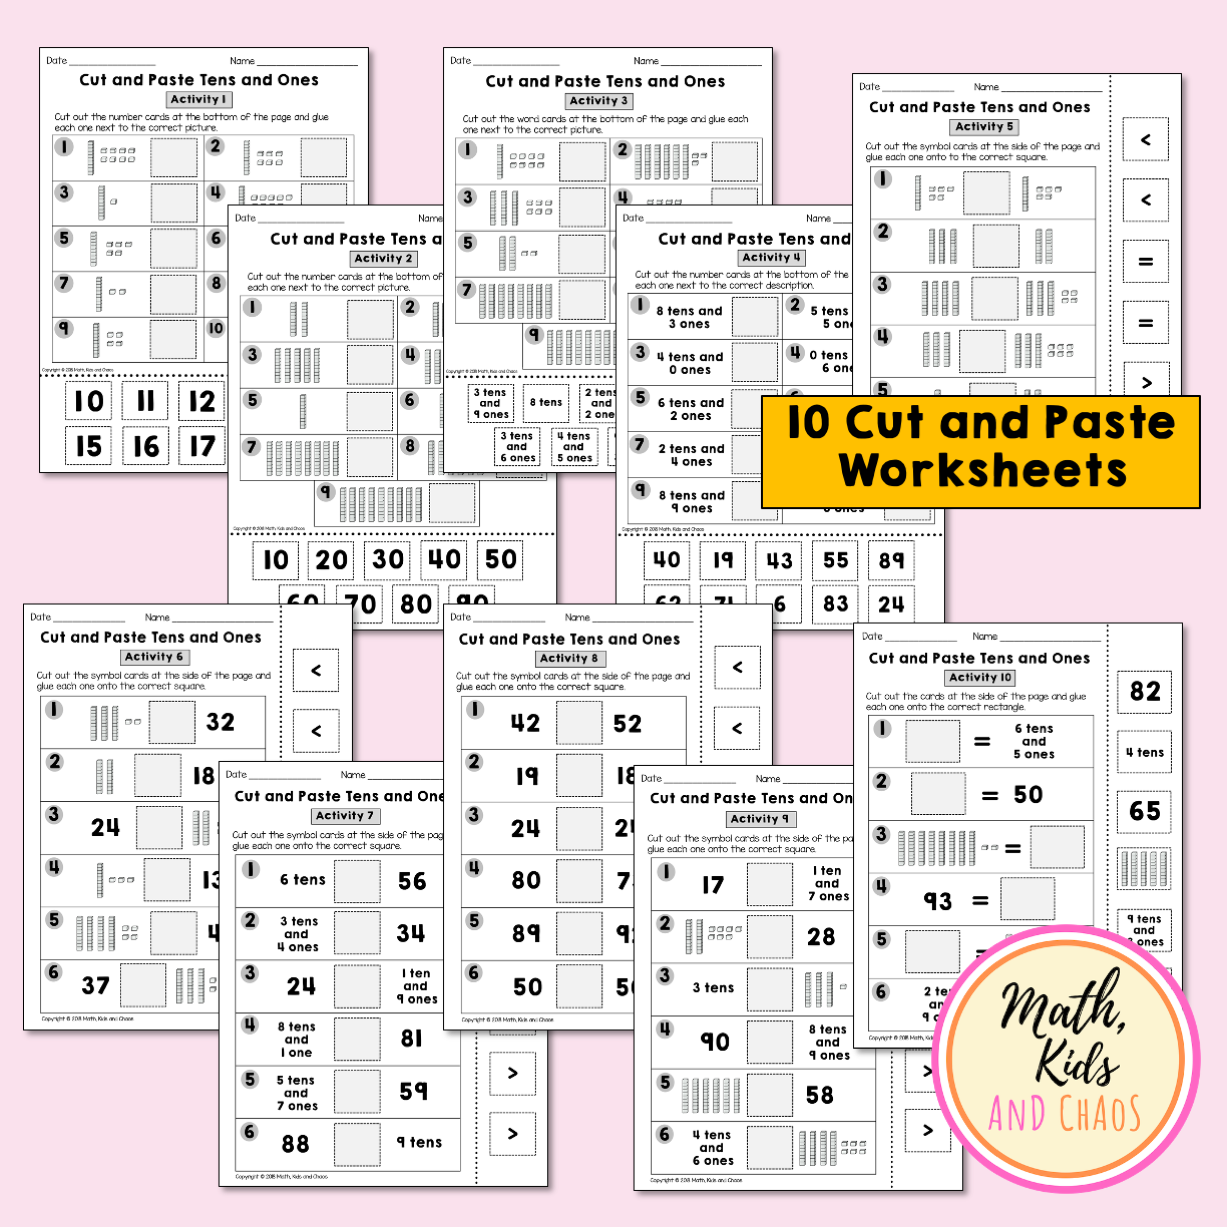 Place Value Cut and Paste Workseets (TENS and ONES)